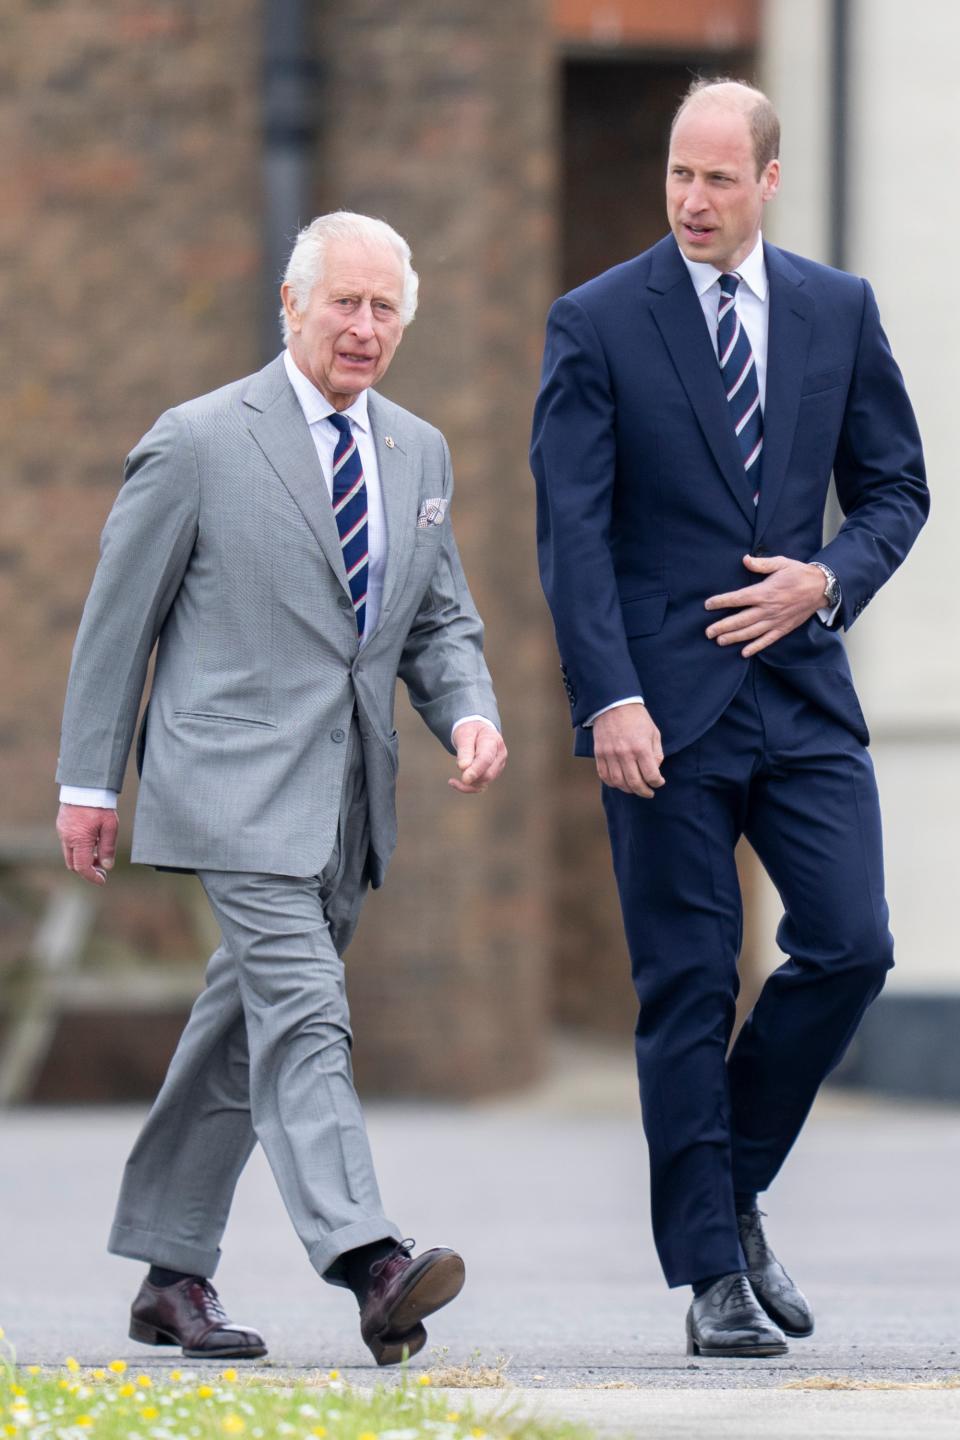 King Charles III, left, and Prince William